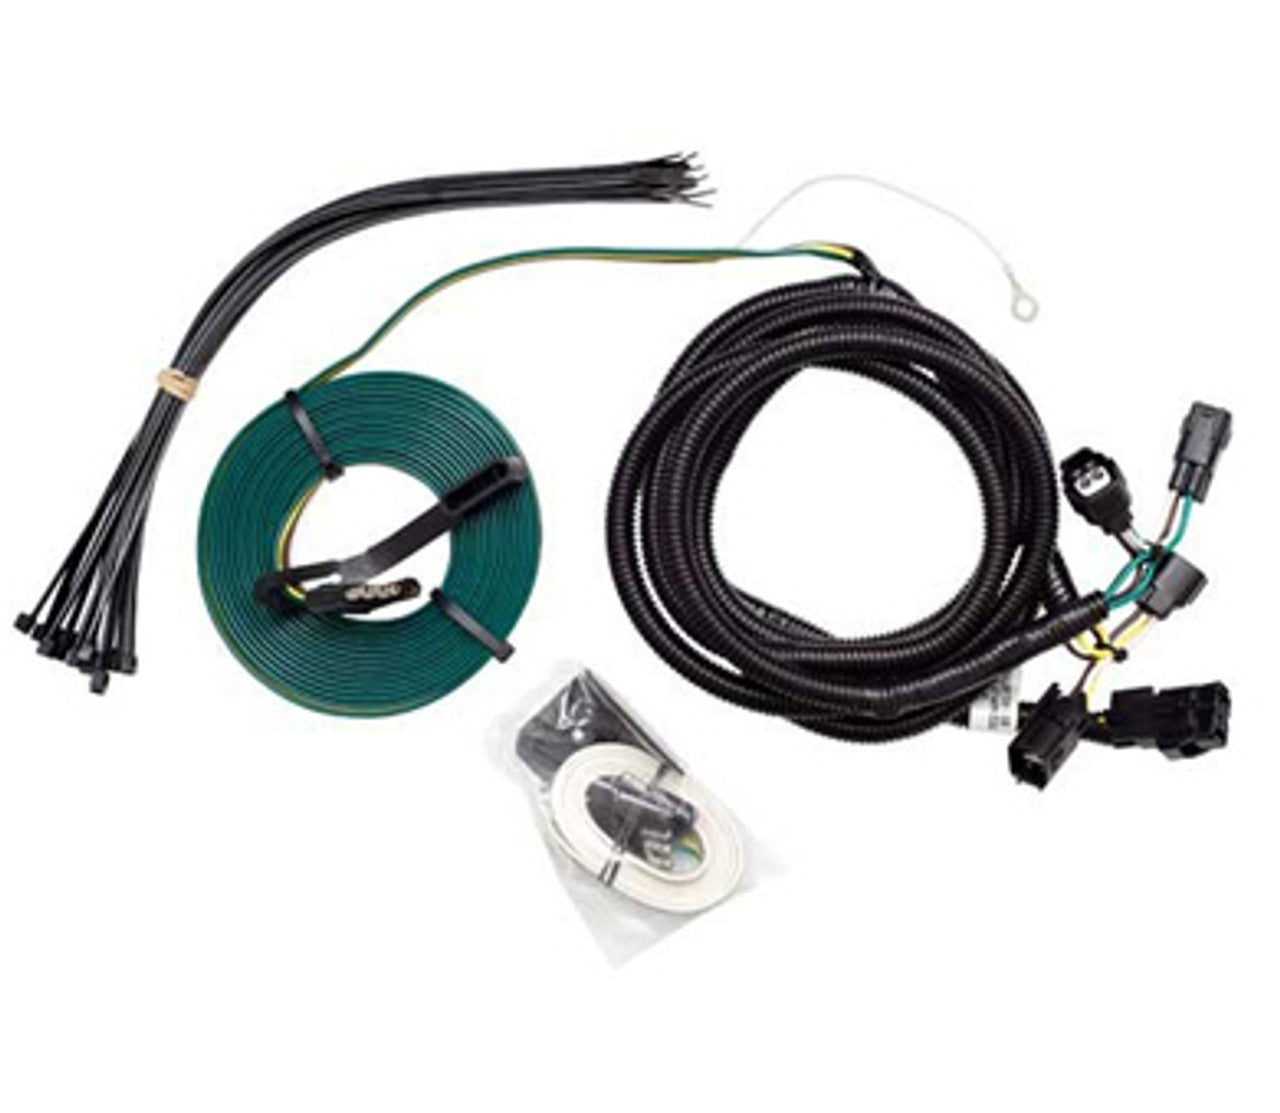 Demco 9523150 Towed Connector Vehicle Wiring Kit For Ford Edge '15-'17